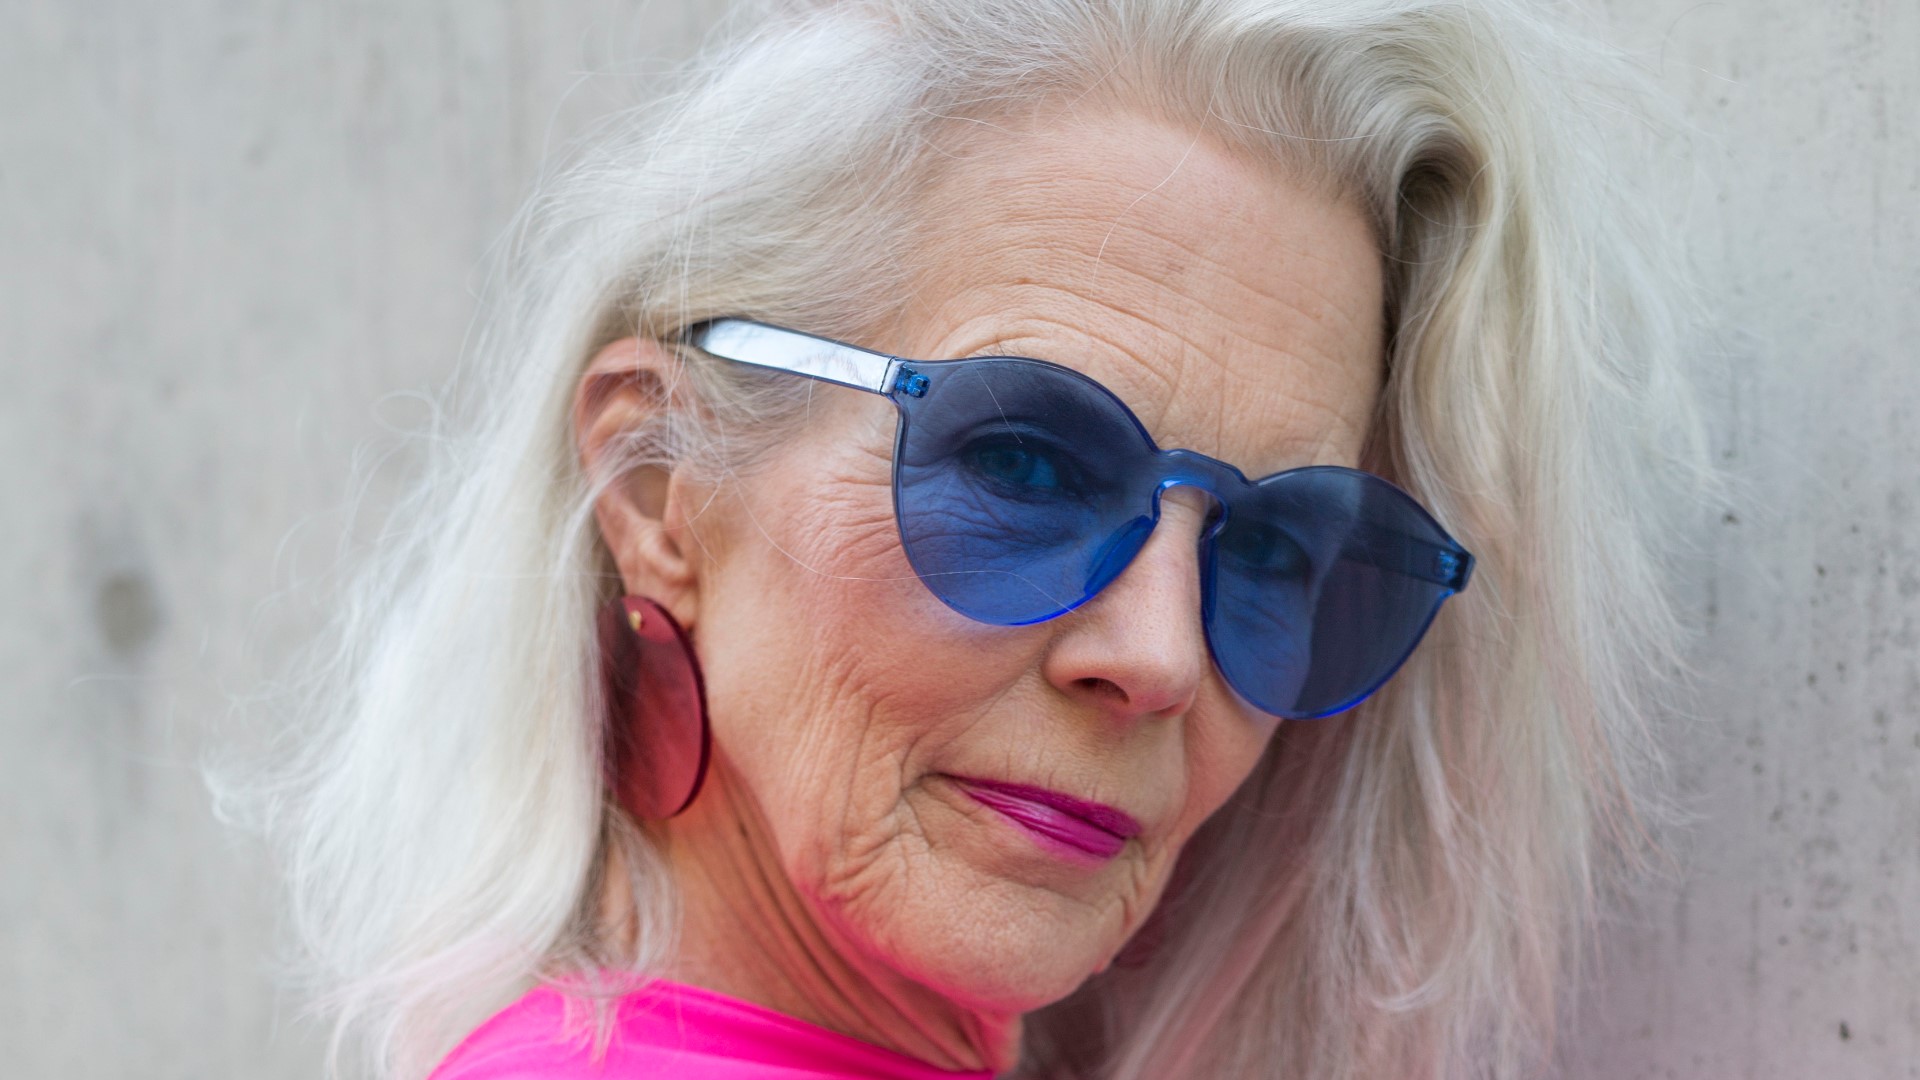 Isa Austen is 73 years old, and her style and grace has caught the eye of international photographers.